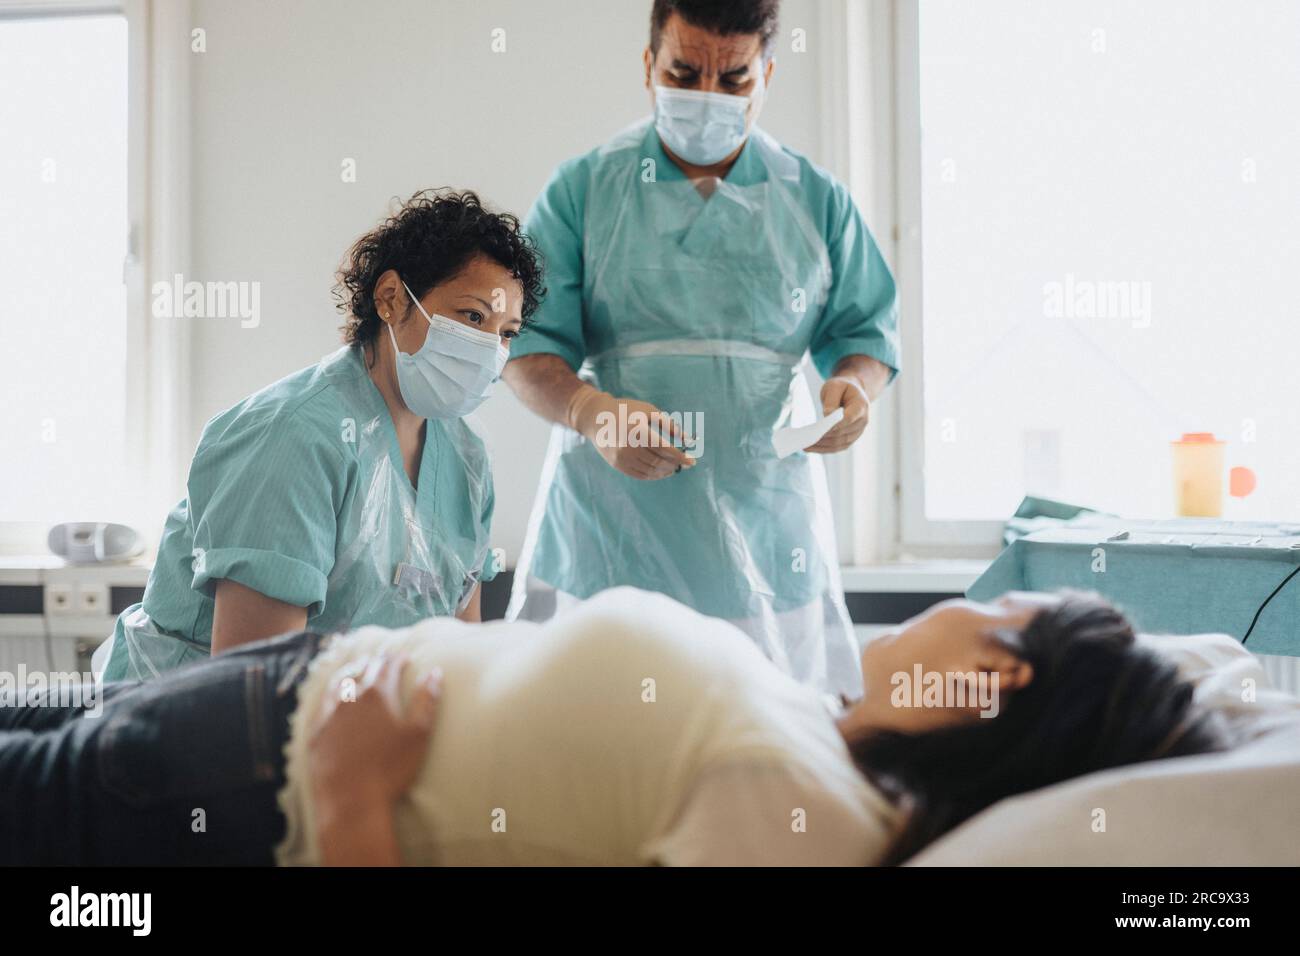 Male and female doctors examining patient in hospital Stock Photo